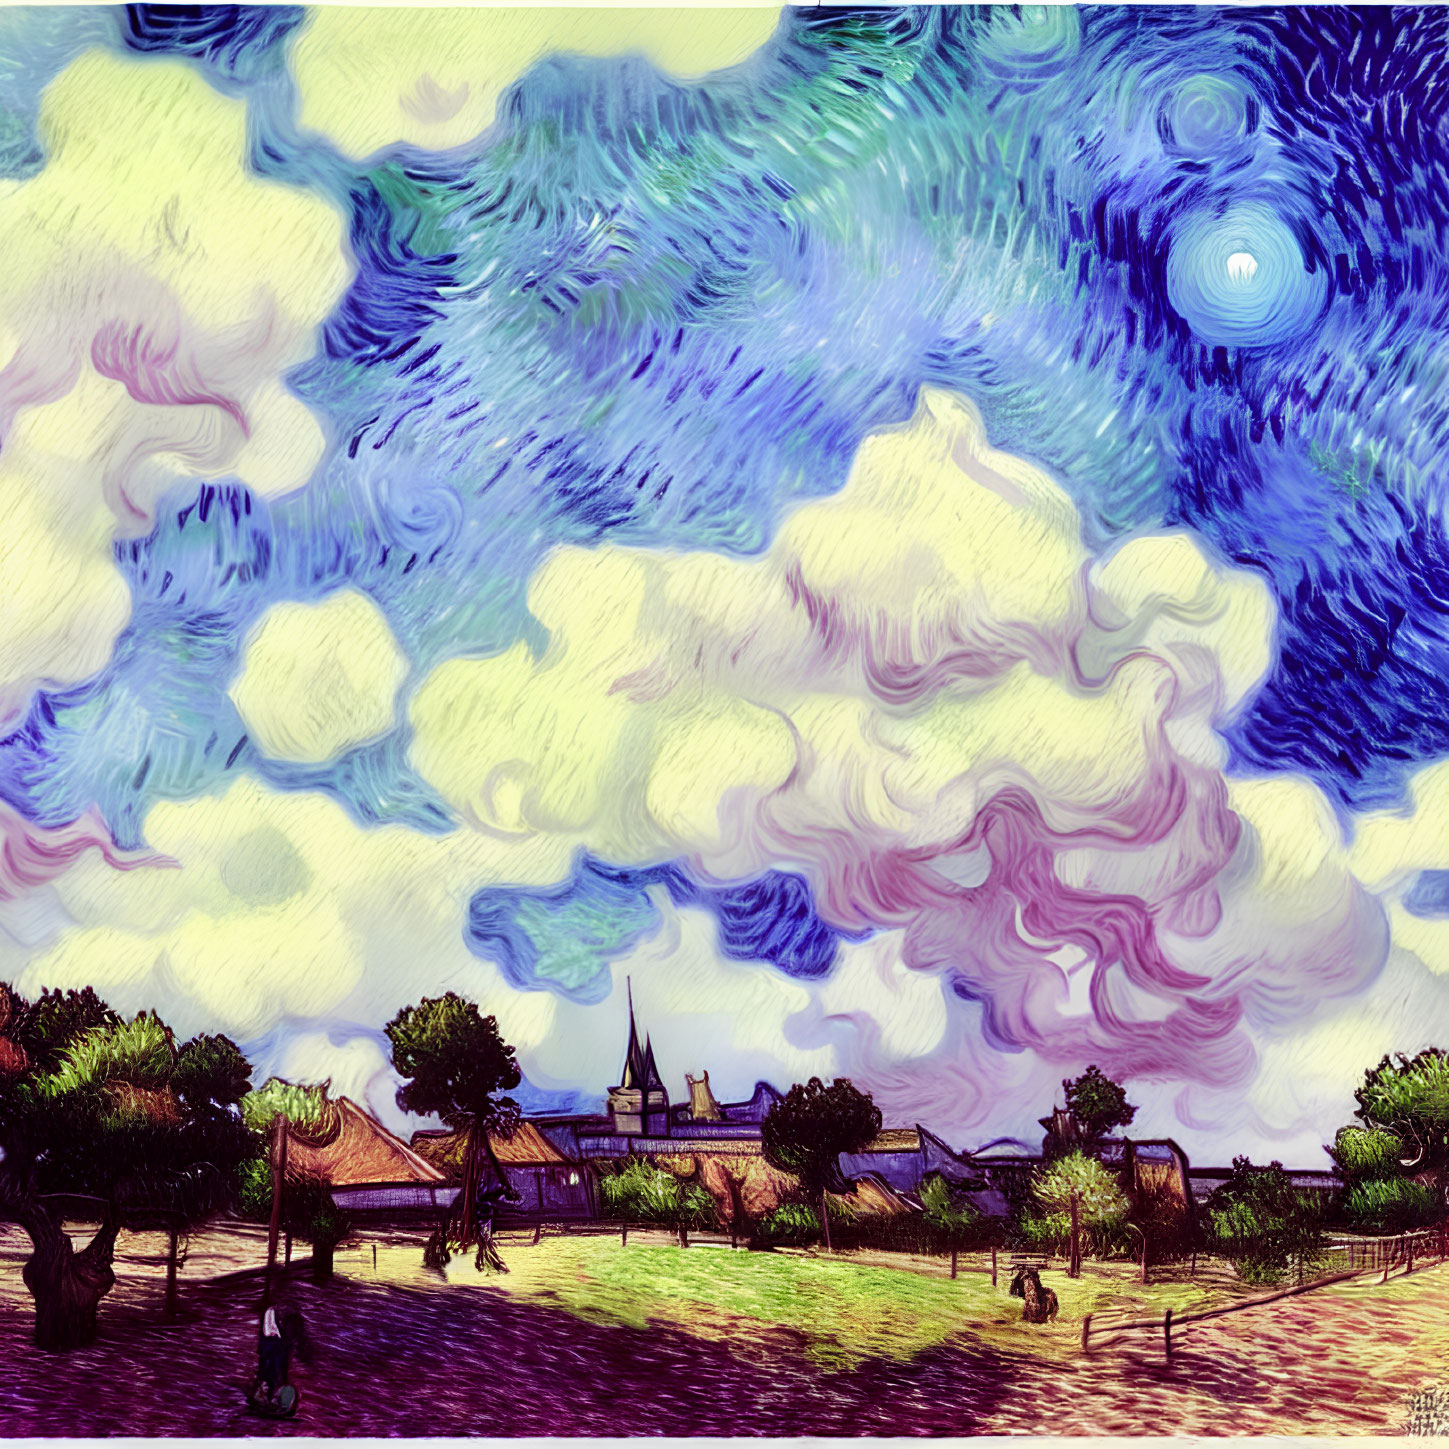 Impressionist-style painting of swirling sky and landscape